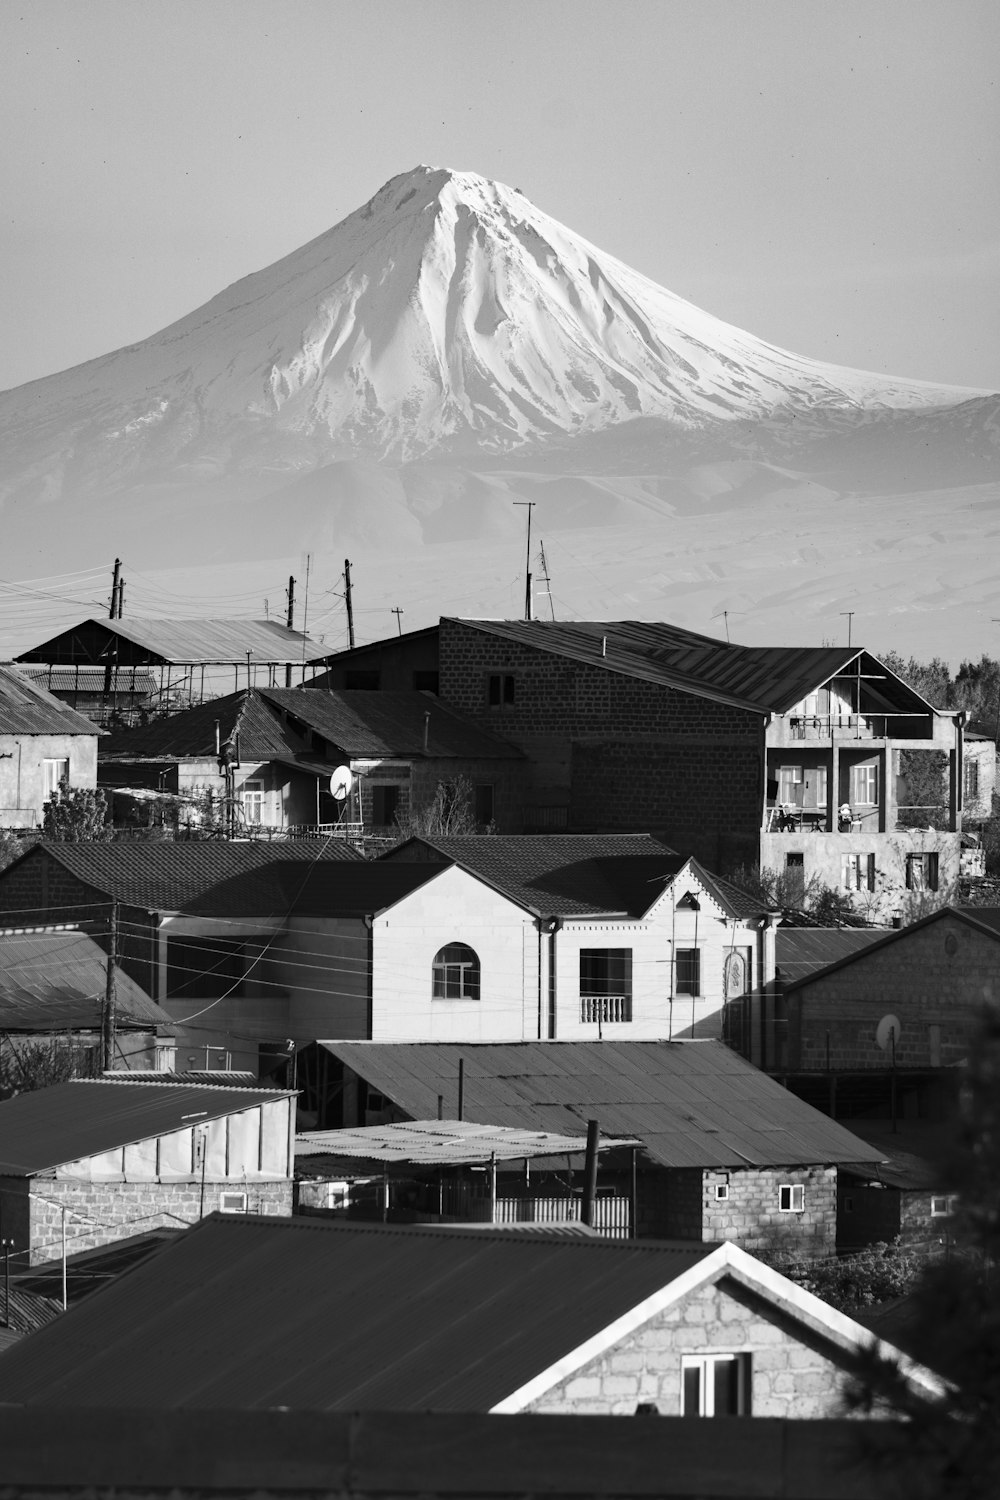 a black and white photo of a city with a mountain in the background